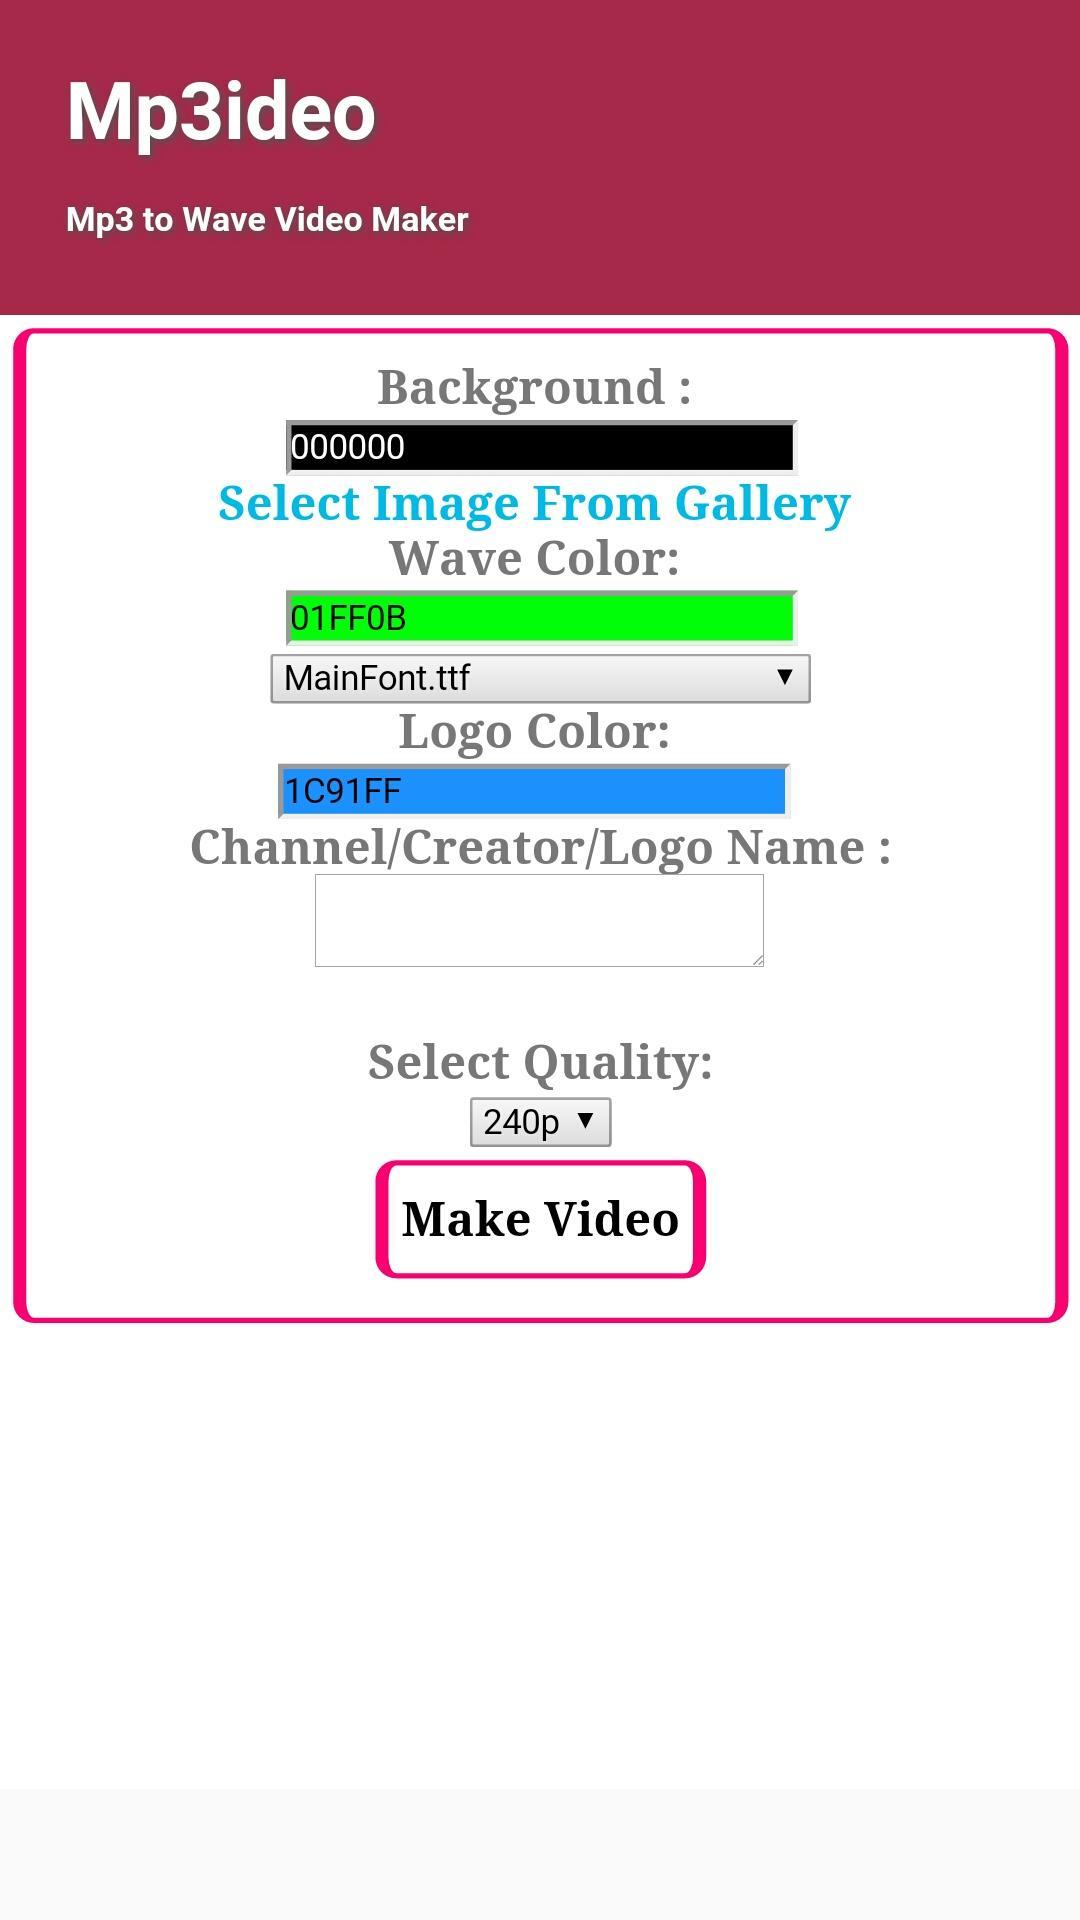 Mp3 to Video Maker Waveform Converter - Mp3ideo for Android - APK Download